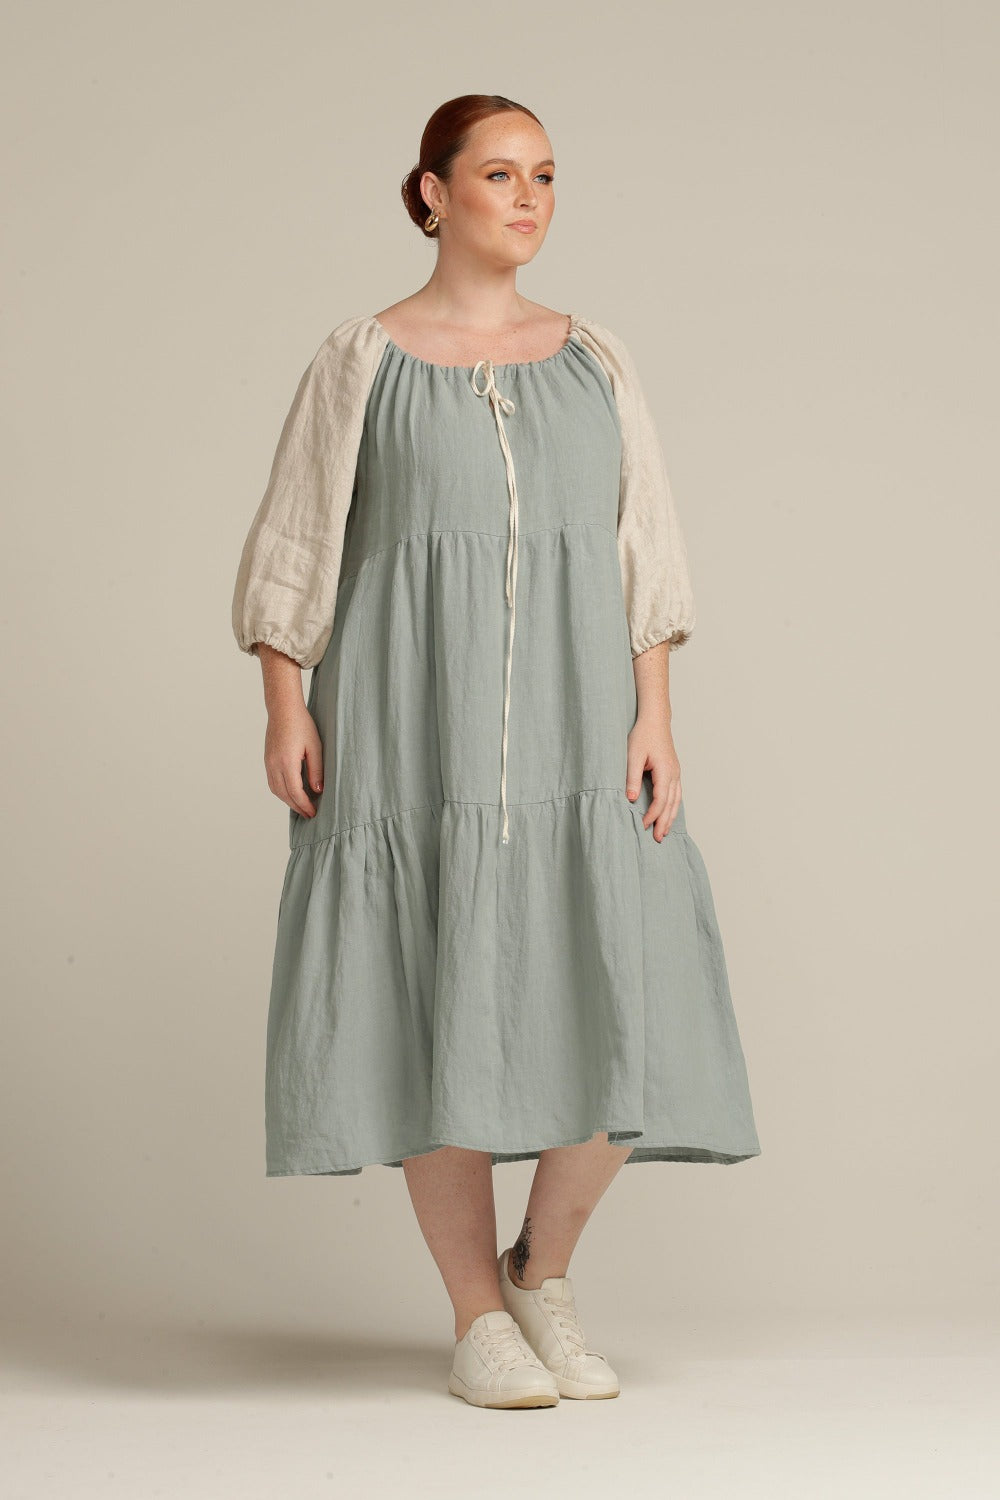 woman wearing a sage green and natural sleeve linen dress and white shoes